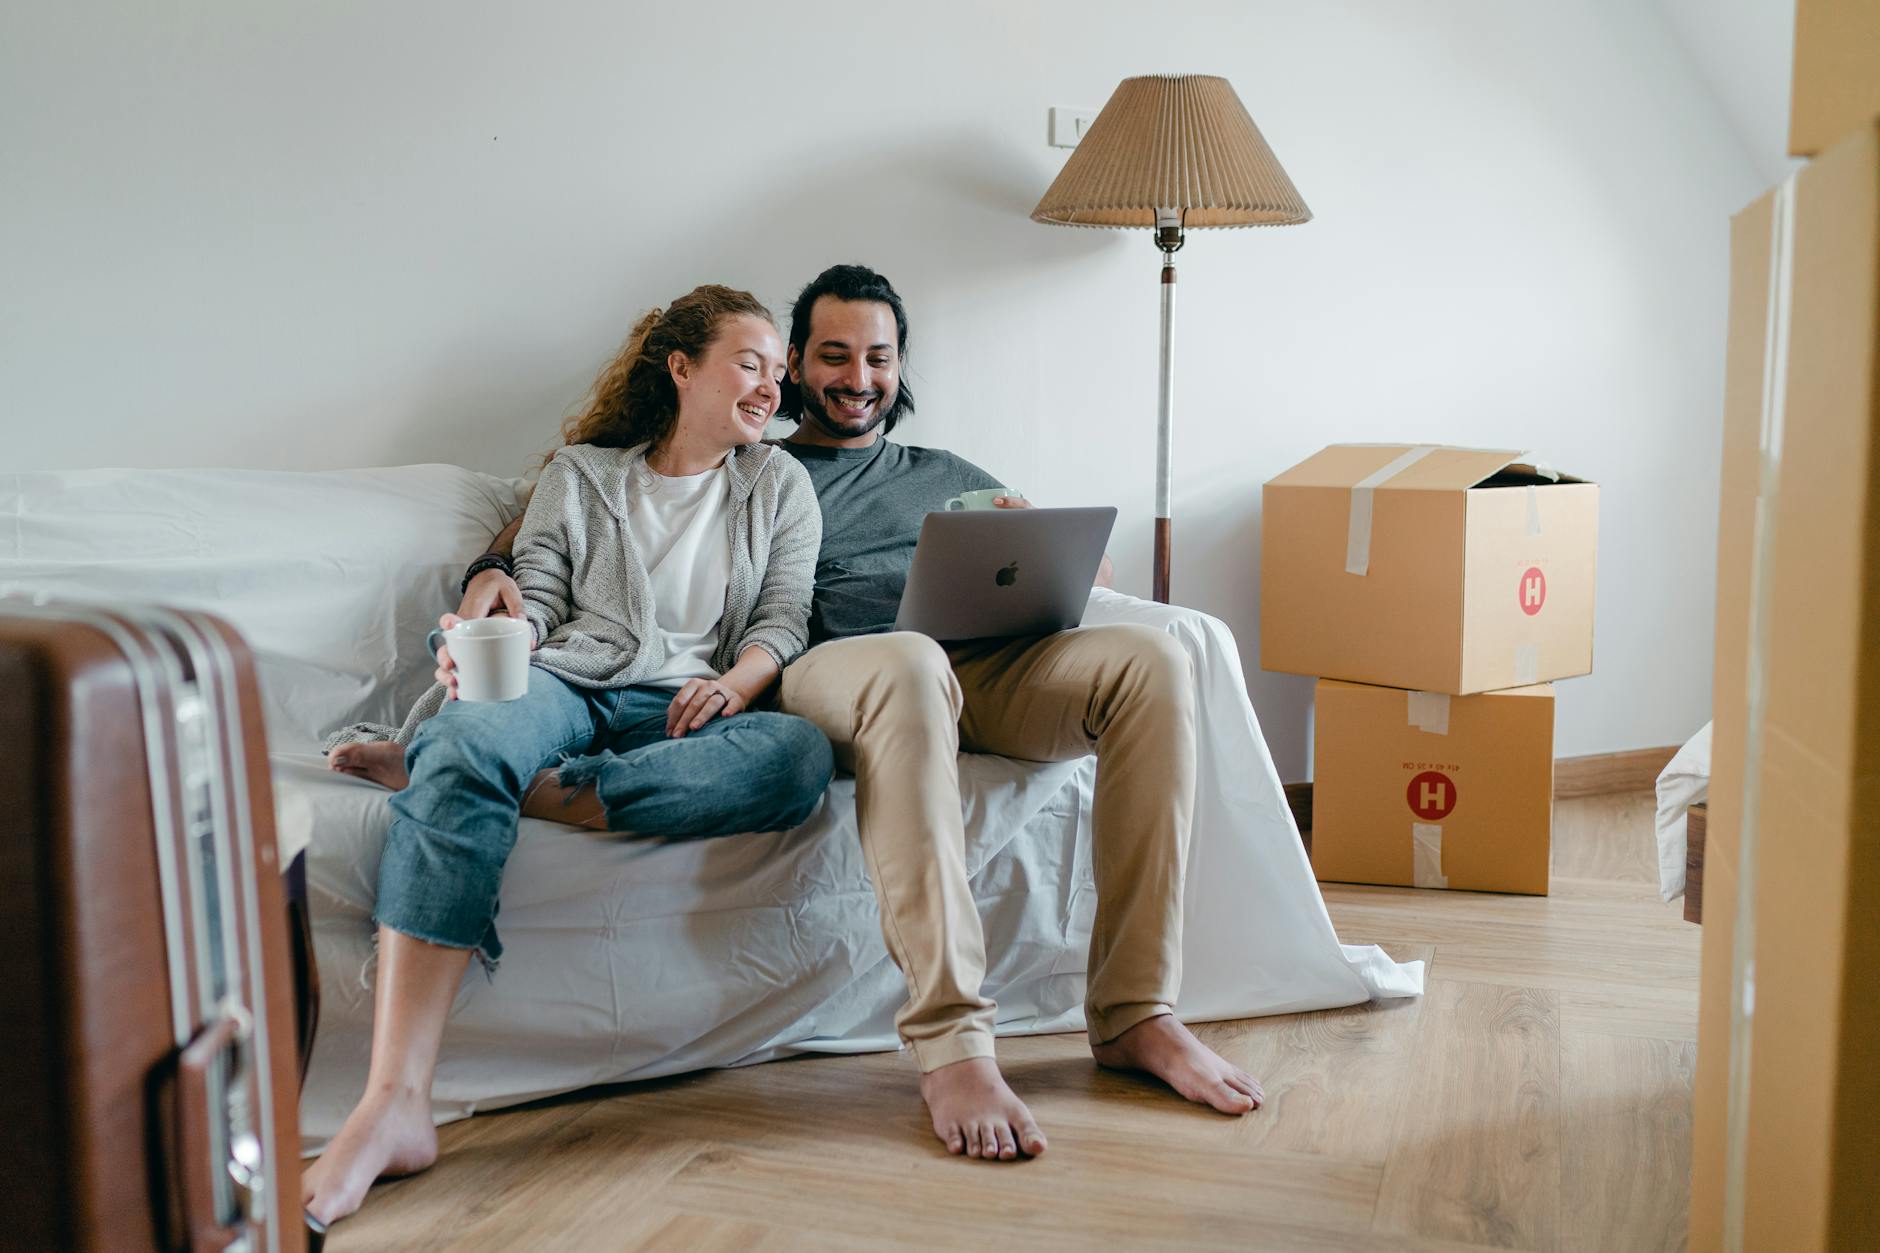 Cheerful couple watching video on laptop together while sitting on couch in living room when moving house